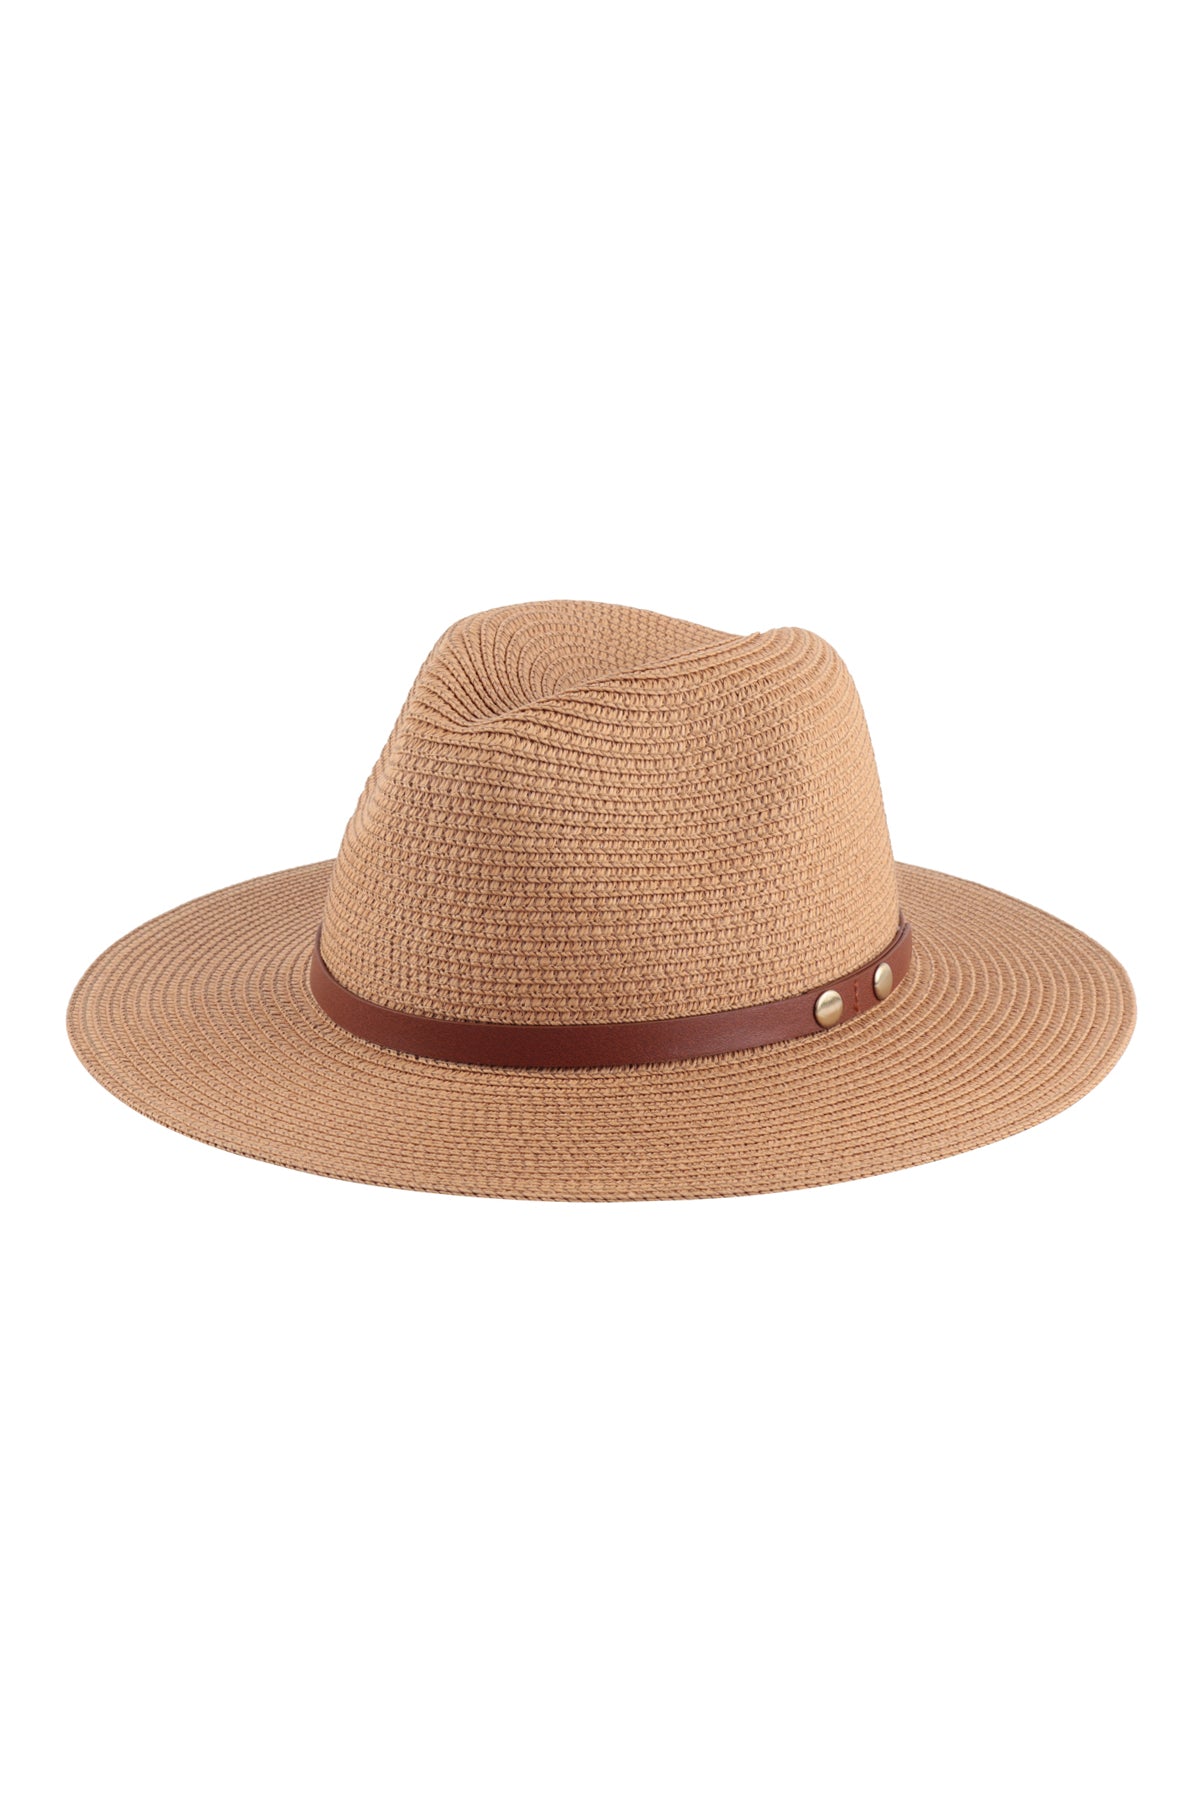 PANAMA BRIM SUMMER HAT WITH LEATHER STRAP